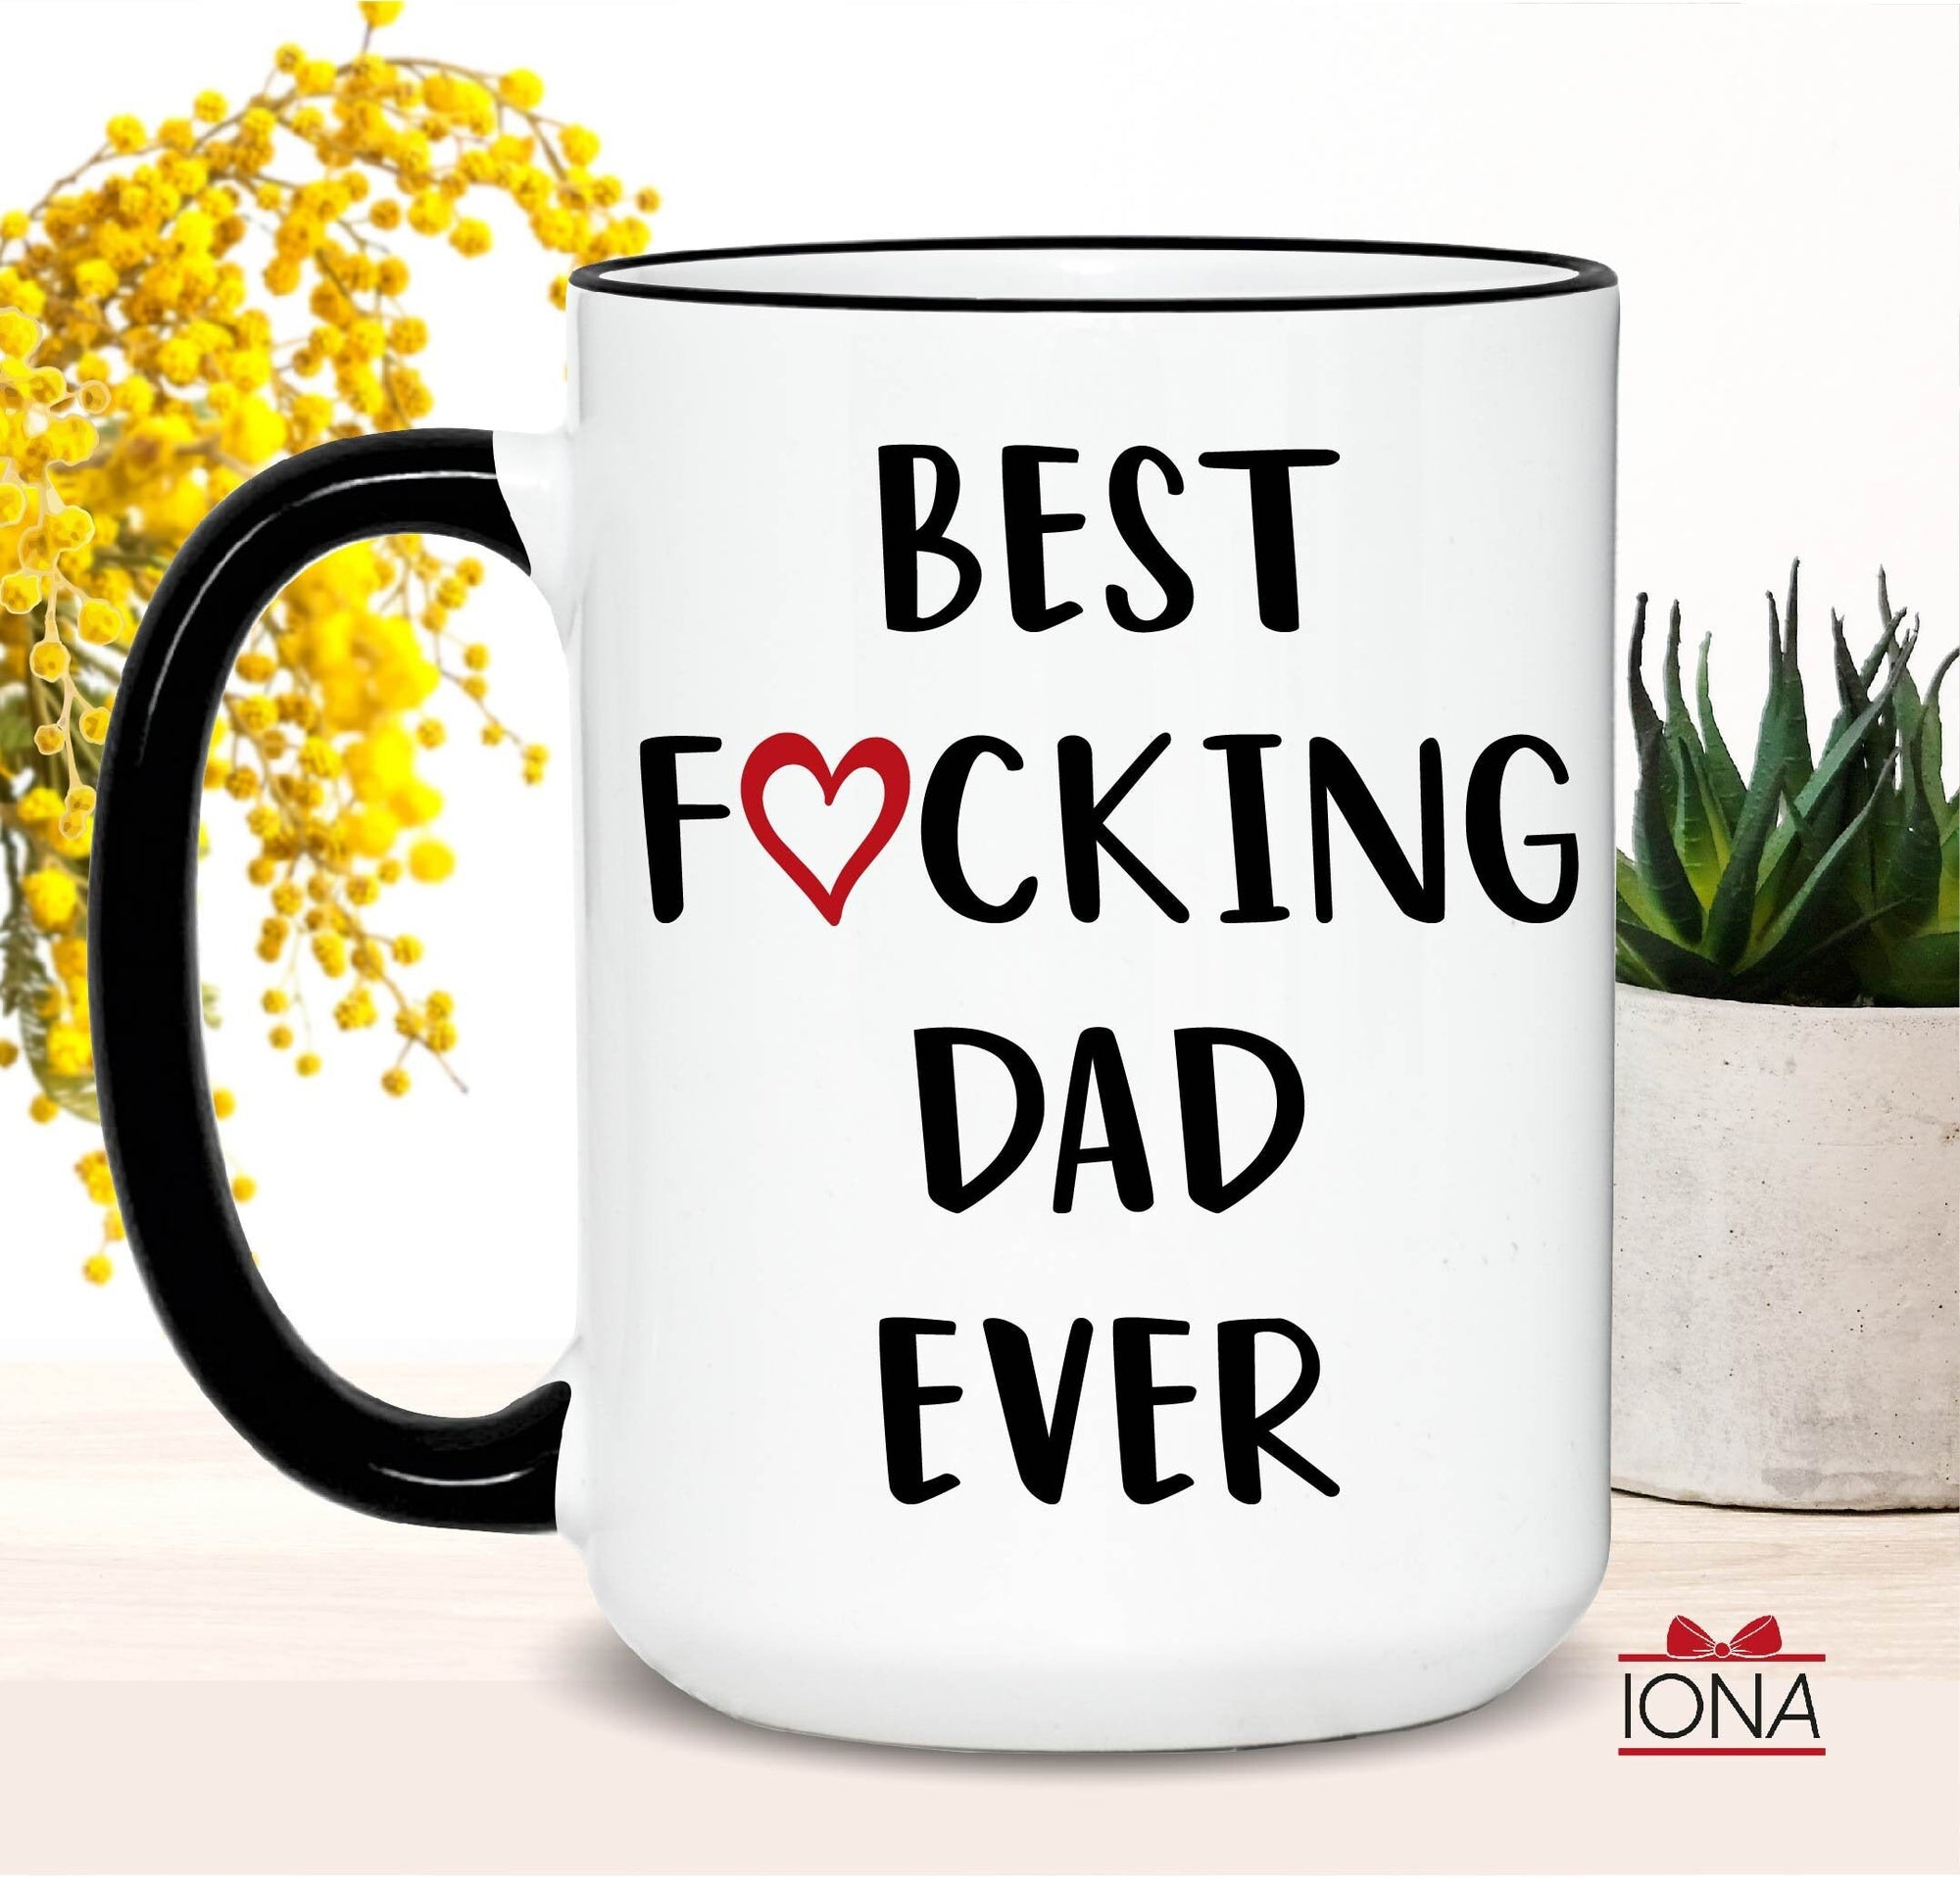 Personalized Funny Dad Gift, Best Dad Ever Mug, Dad Coffee Mug, Best Fucking Dad Ever Mug, Christmas Father Gift, Fathers Day gift, Birthday